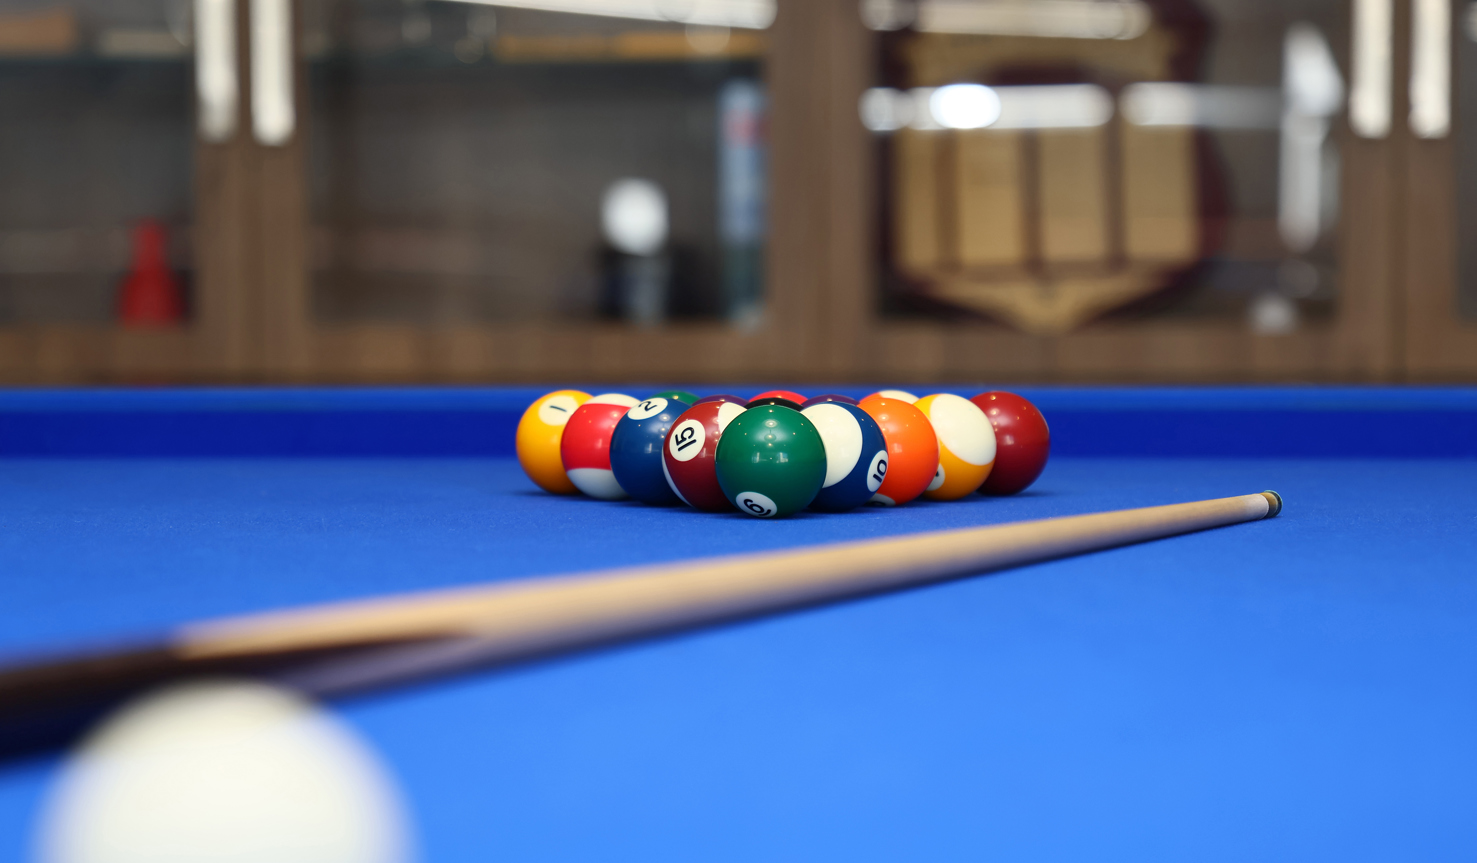 Halcyon Ridge close up pool table focused on cue and balls.